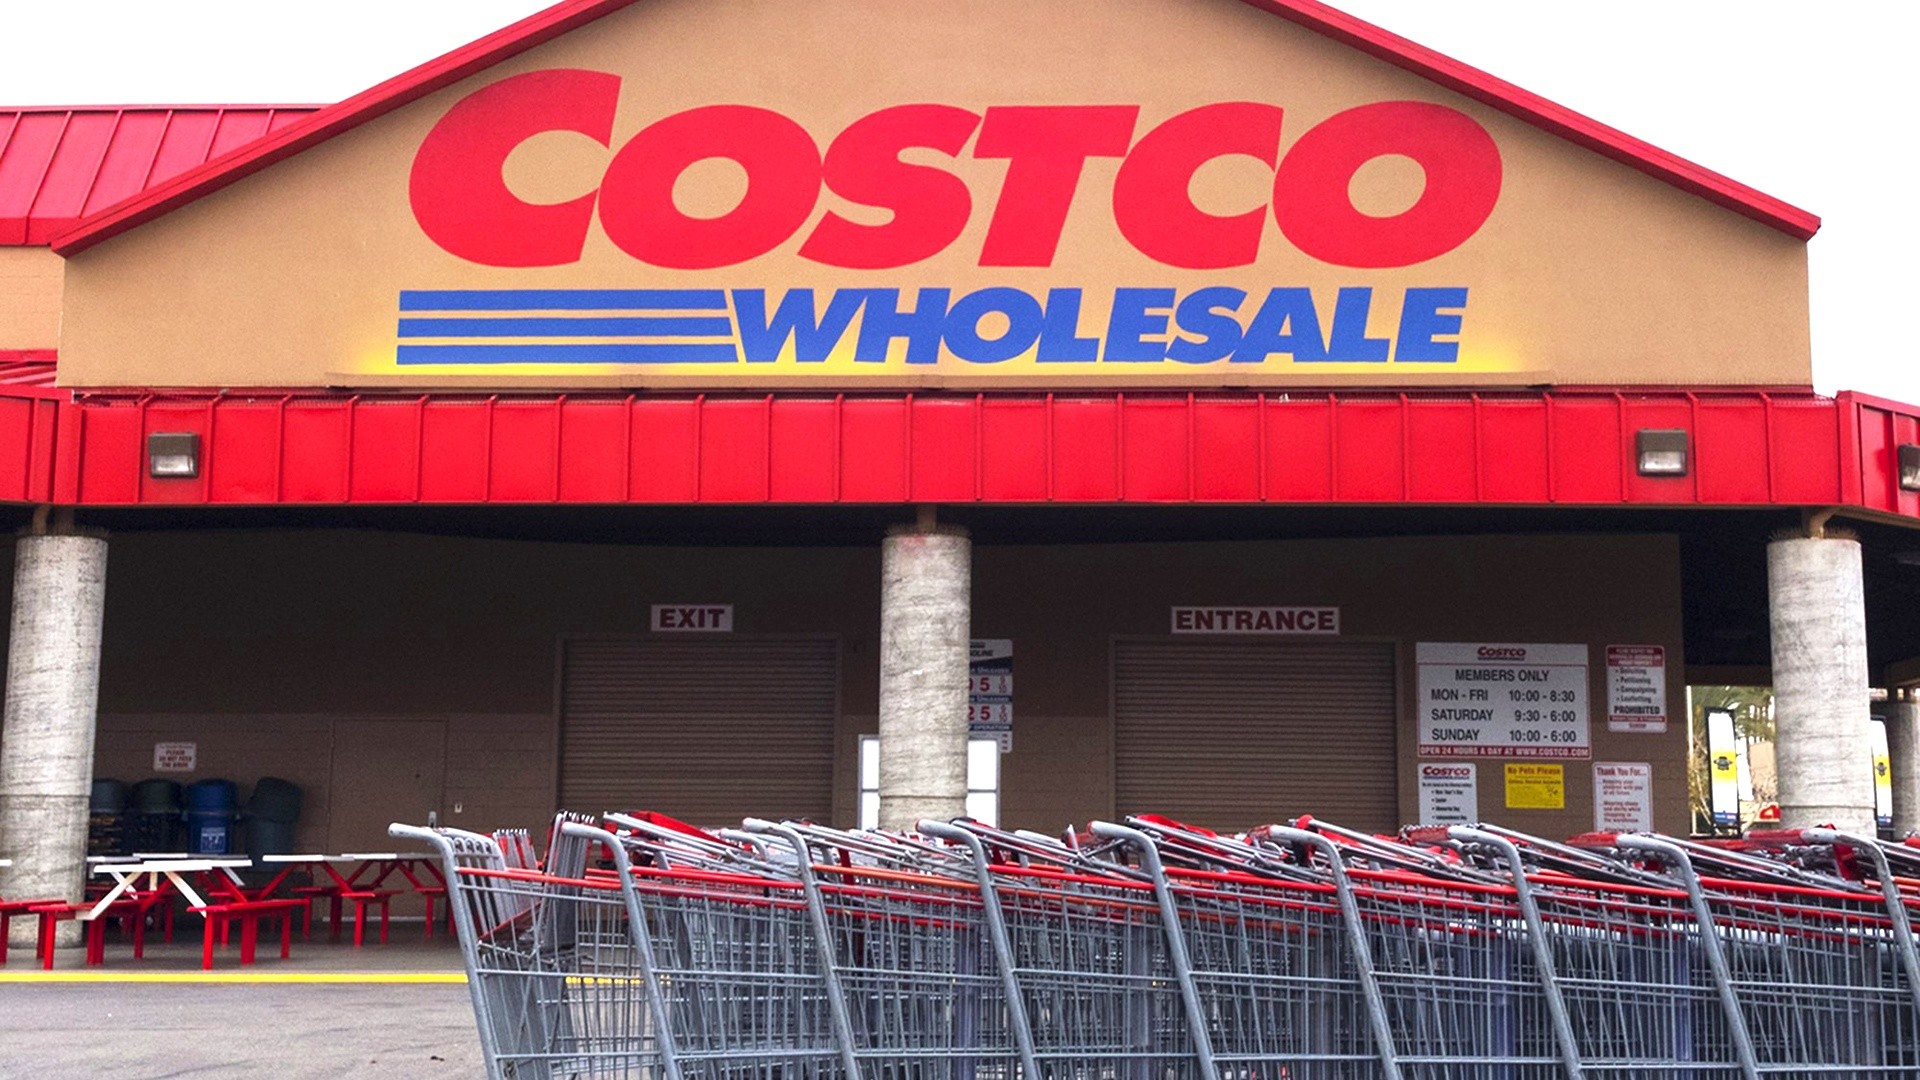 Costco Wholesale #viral #fyp #goodfinds #shopoholic #shopping #costco